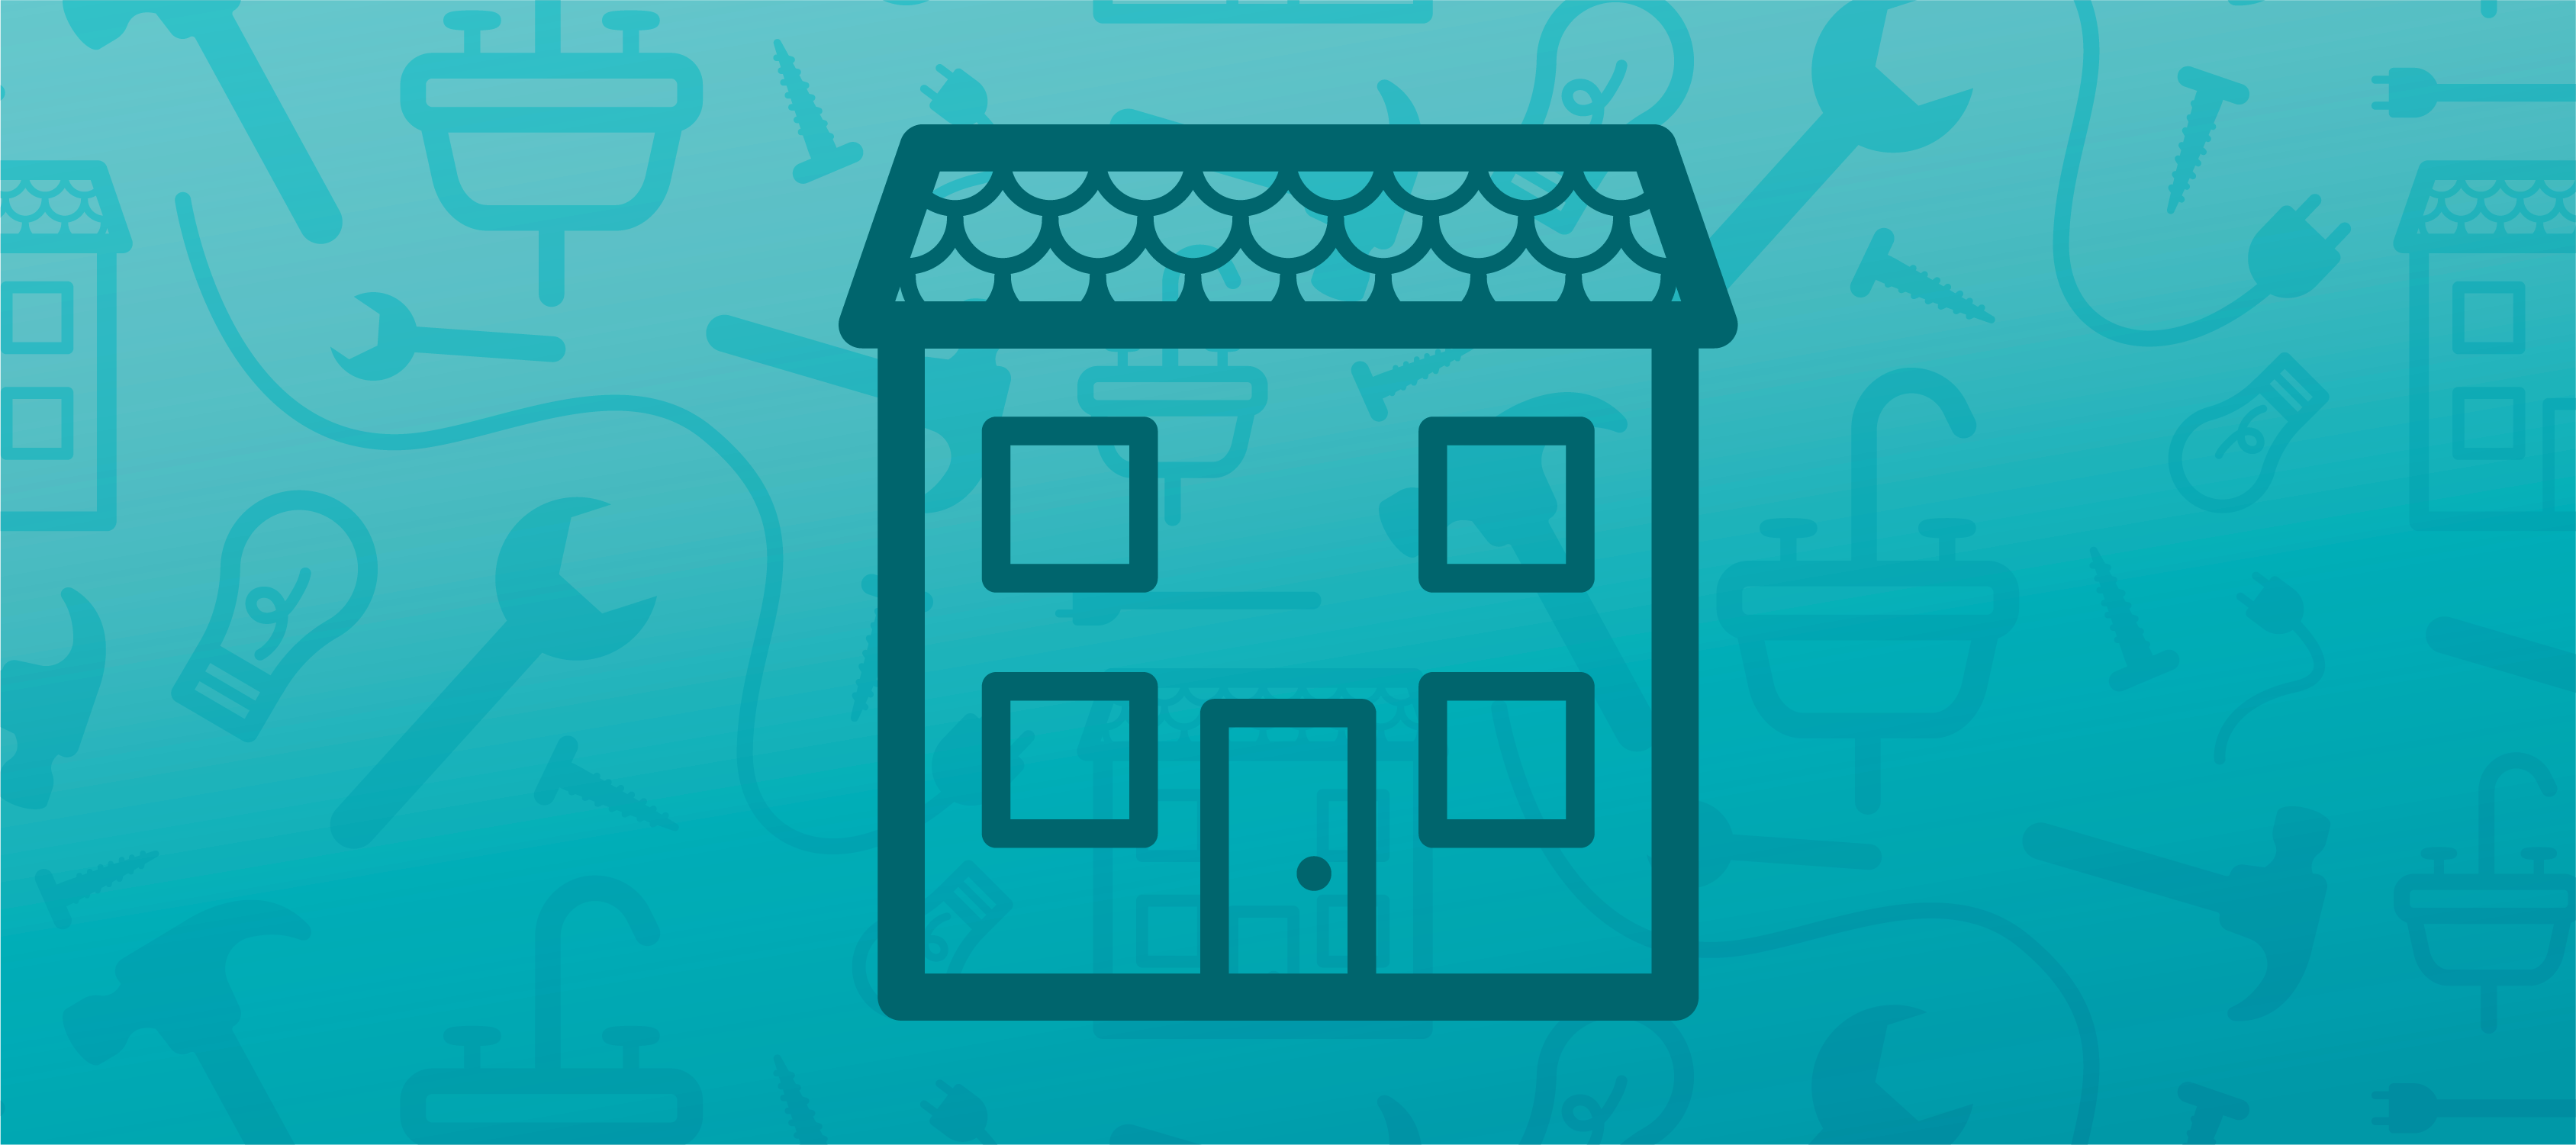 A blue header image featuring an icon of a house in the center and faded contractor icons in the background